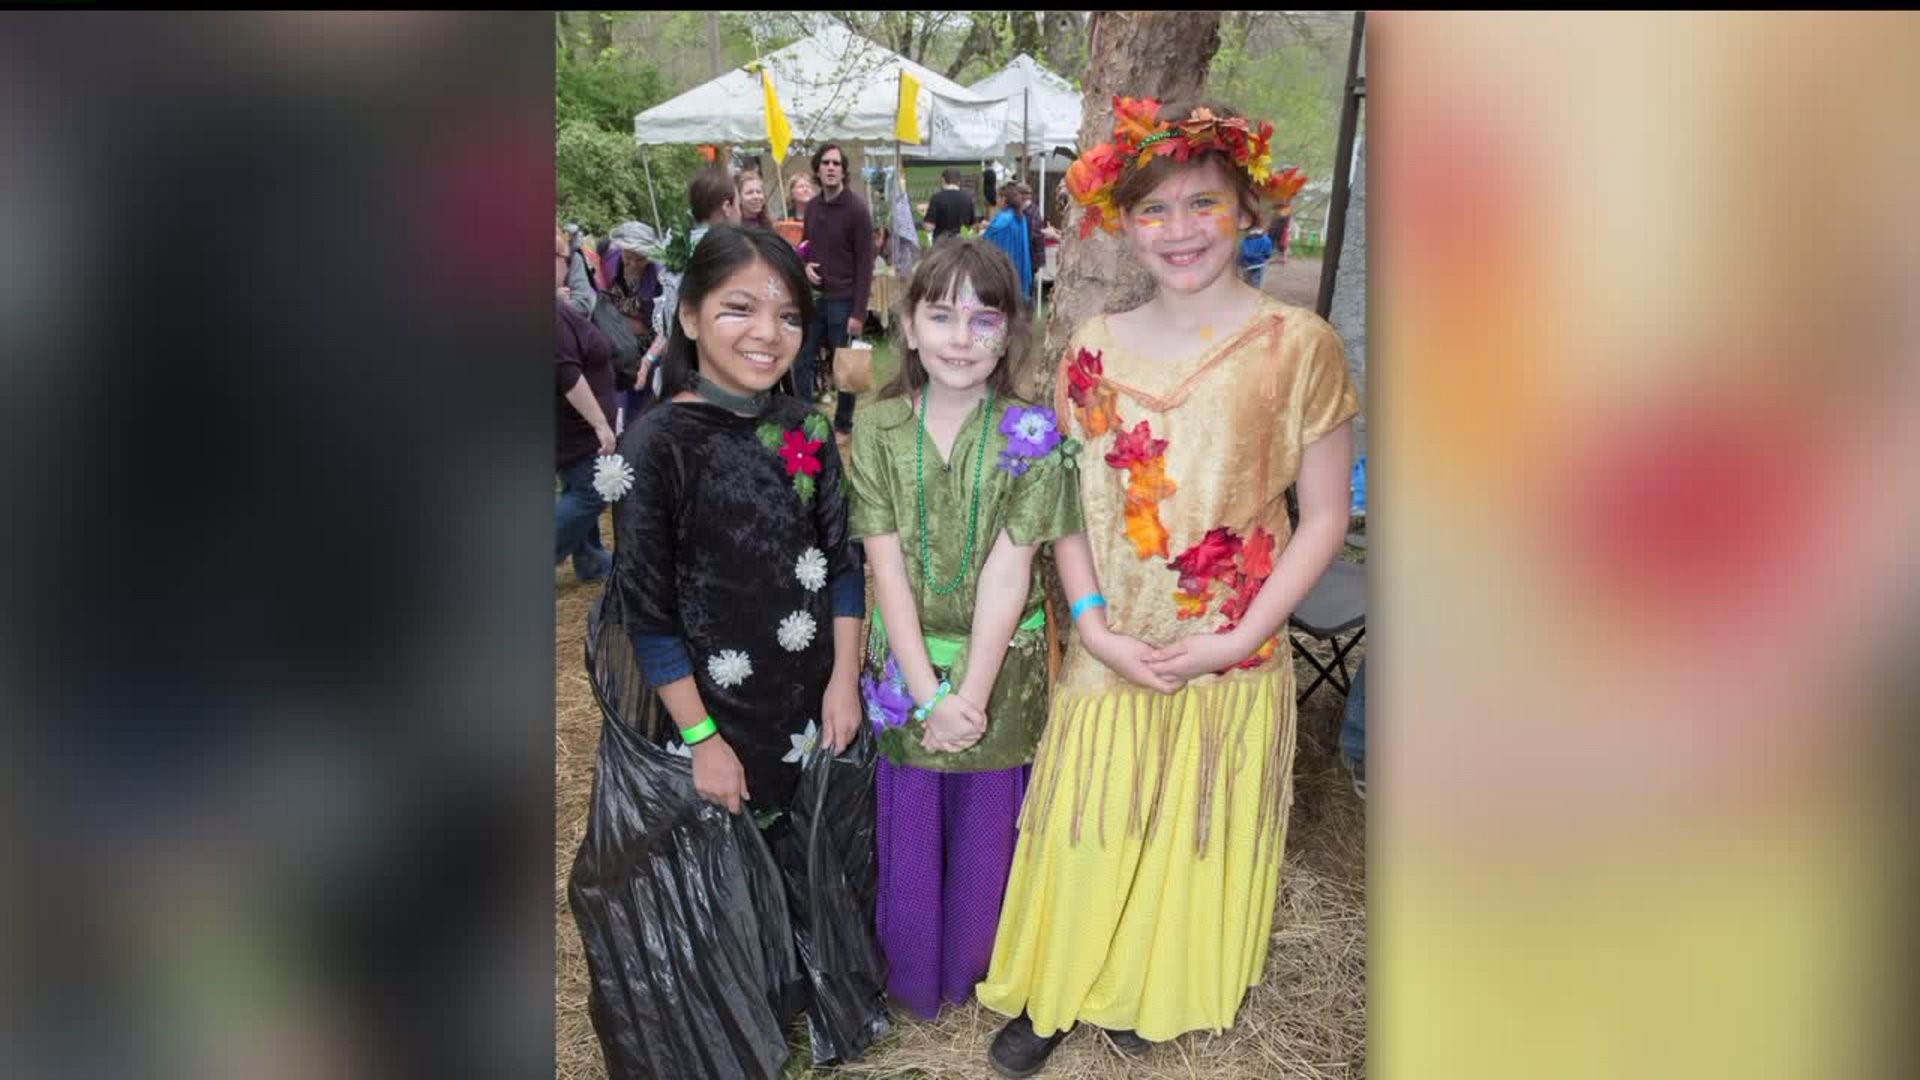 Fairie Festival to be held at Spoutwood Farms for the last time